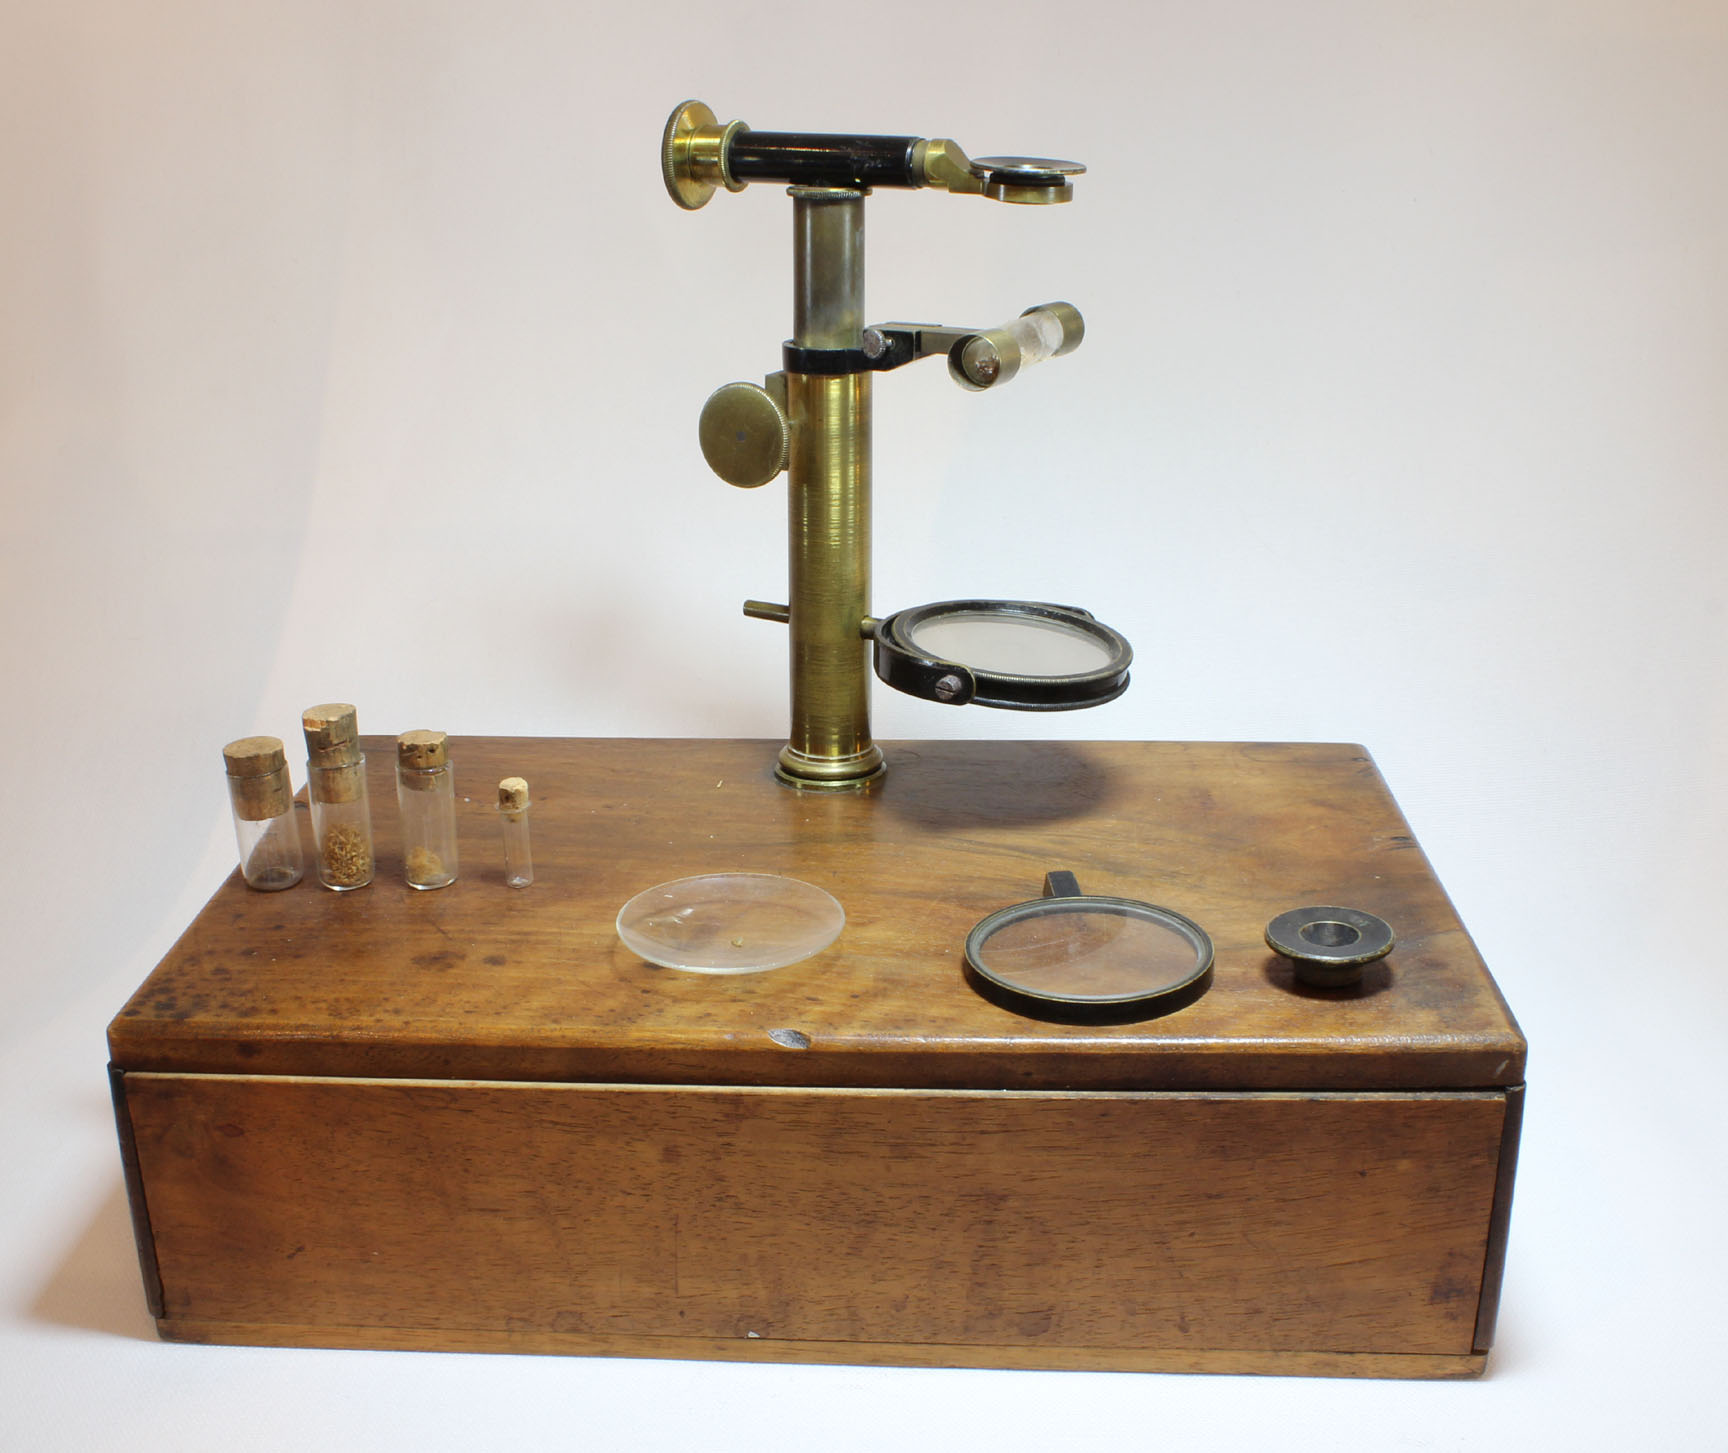 Picart Microscope right side